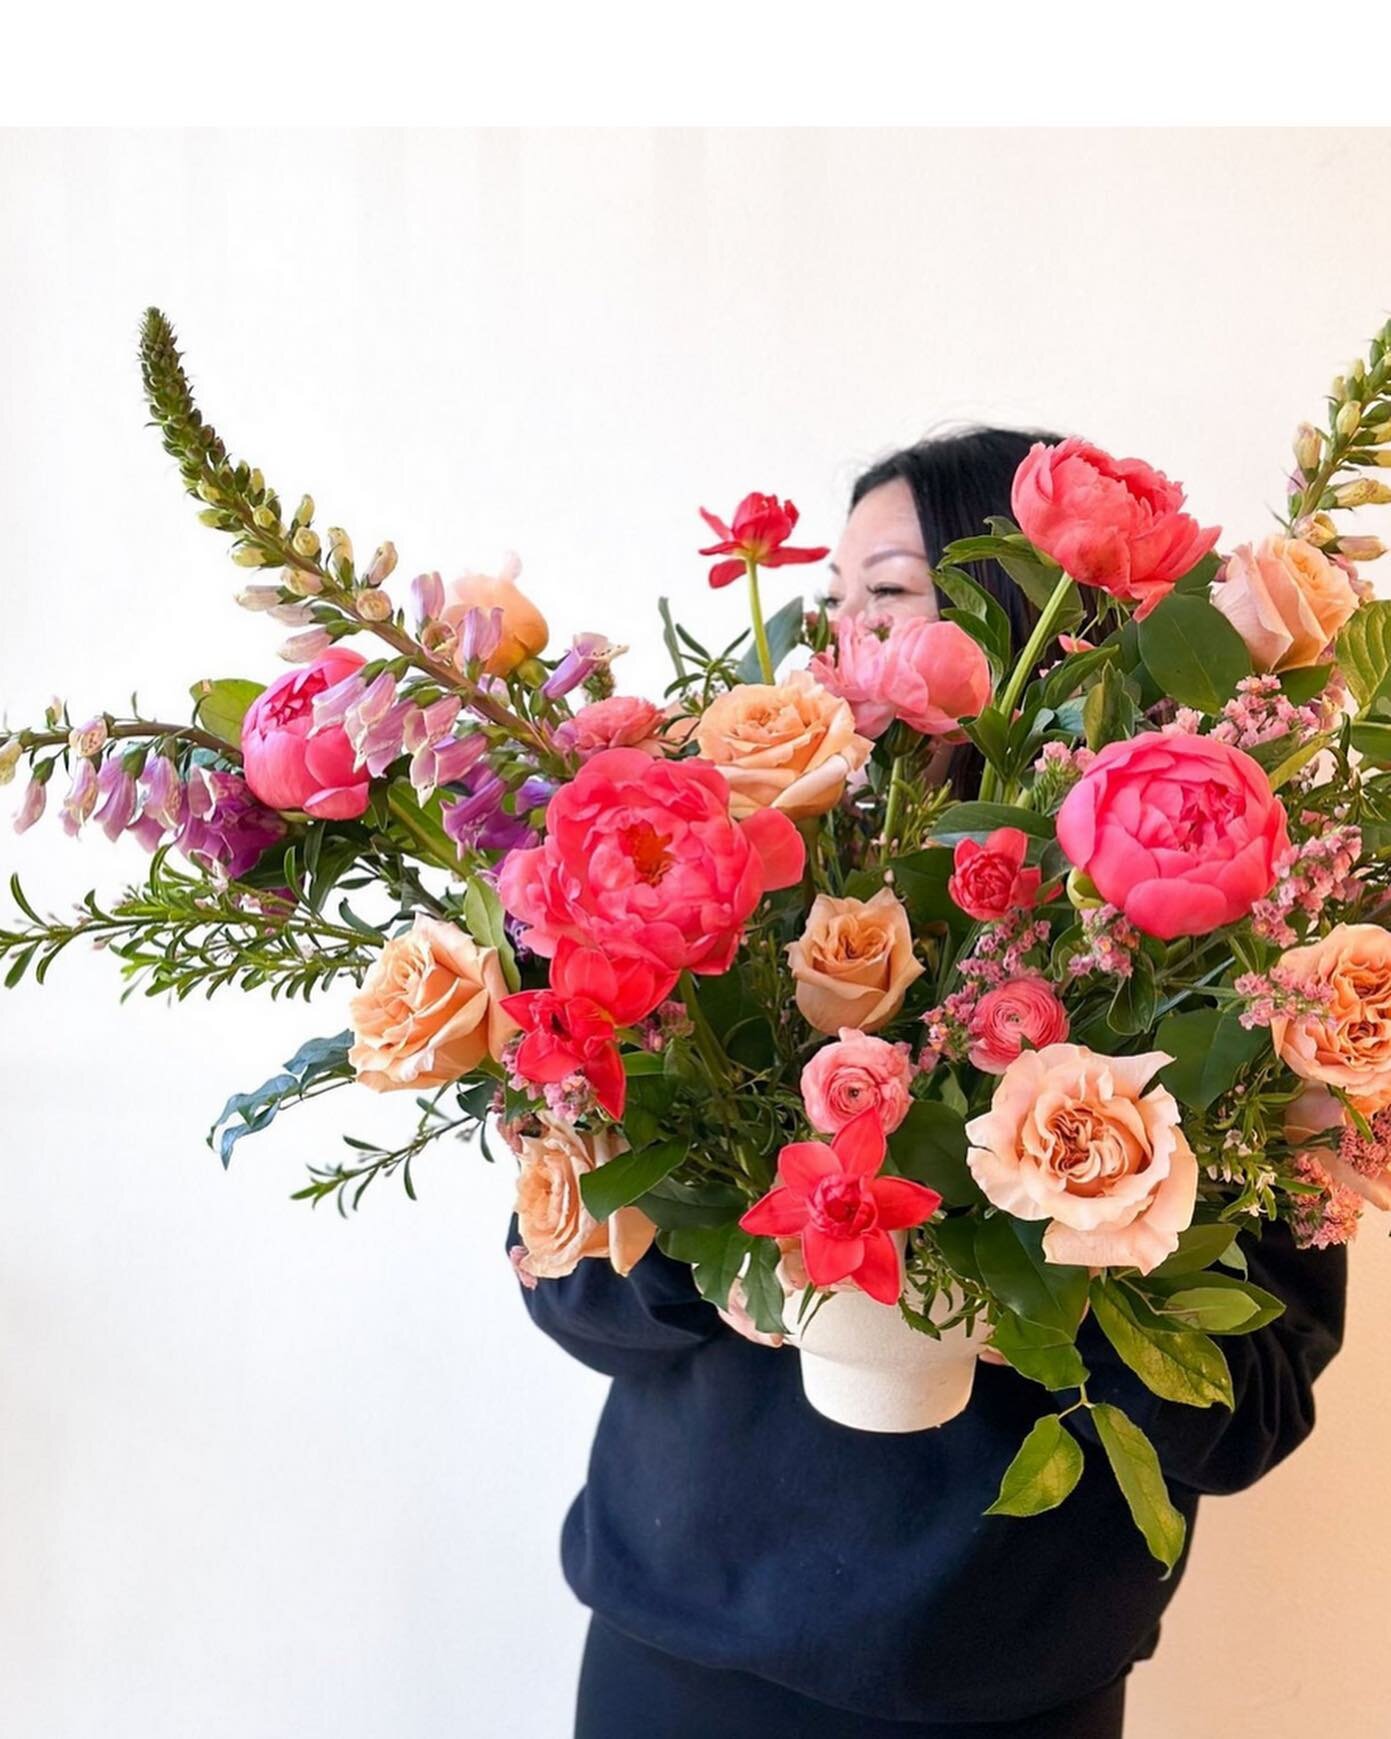 We&rsquo;re thrilled to be hosting our friends @marbledmint tomorrow at Breadbelly! 💐🌷🌹🌻 They&rsquo;ll be posted up outside the cafe with lots of beautiful arrangements for your Lunar New Year celebrations 🧧🧧🧧 

Come by for treats and a bouque